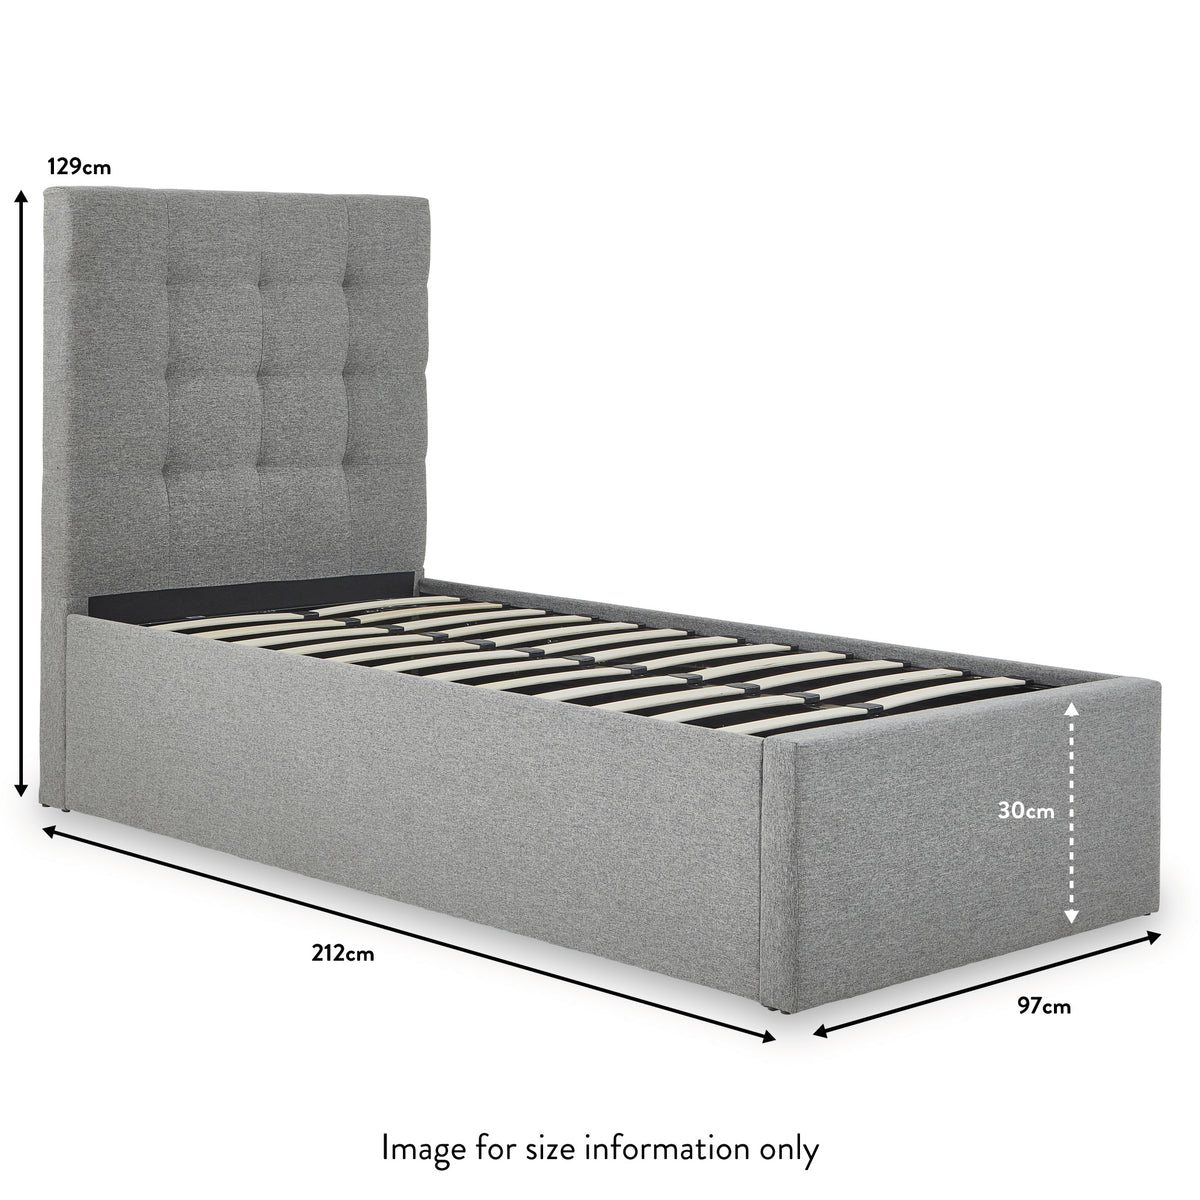 Floss Grey Faux Linen Ottoman Bed Frame dimensions